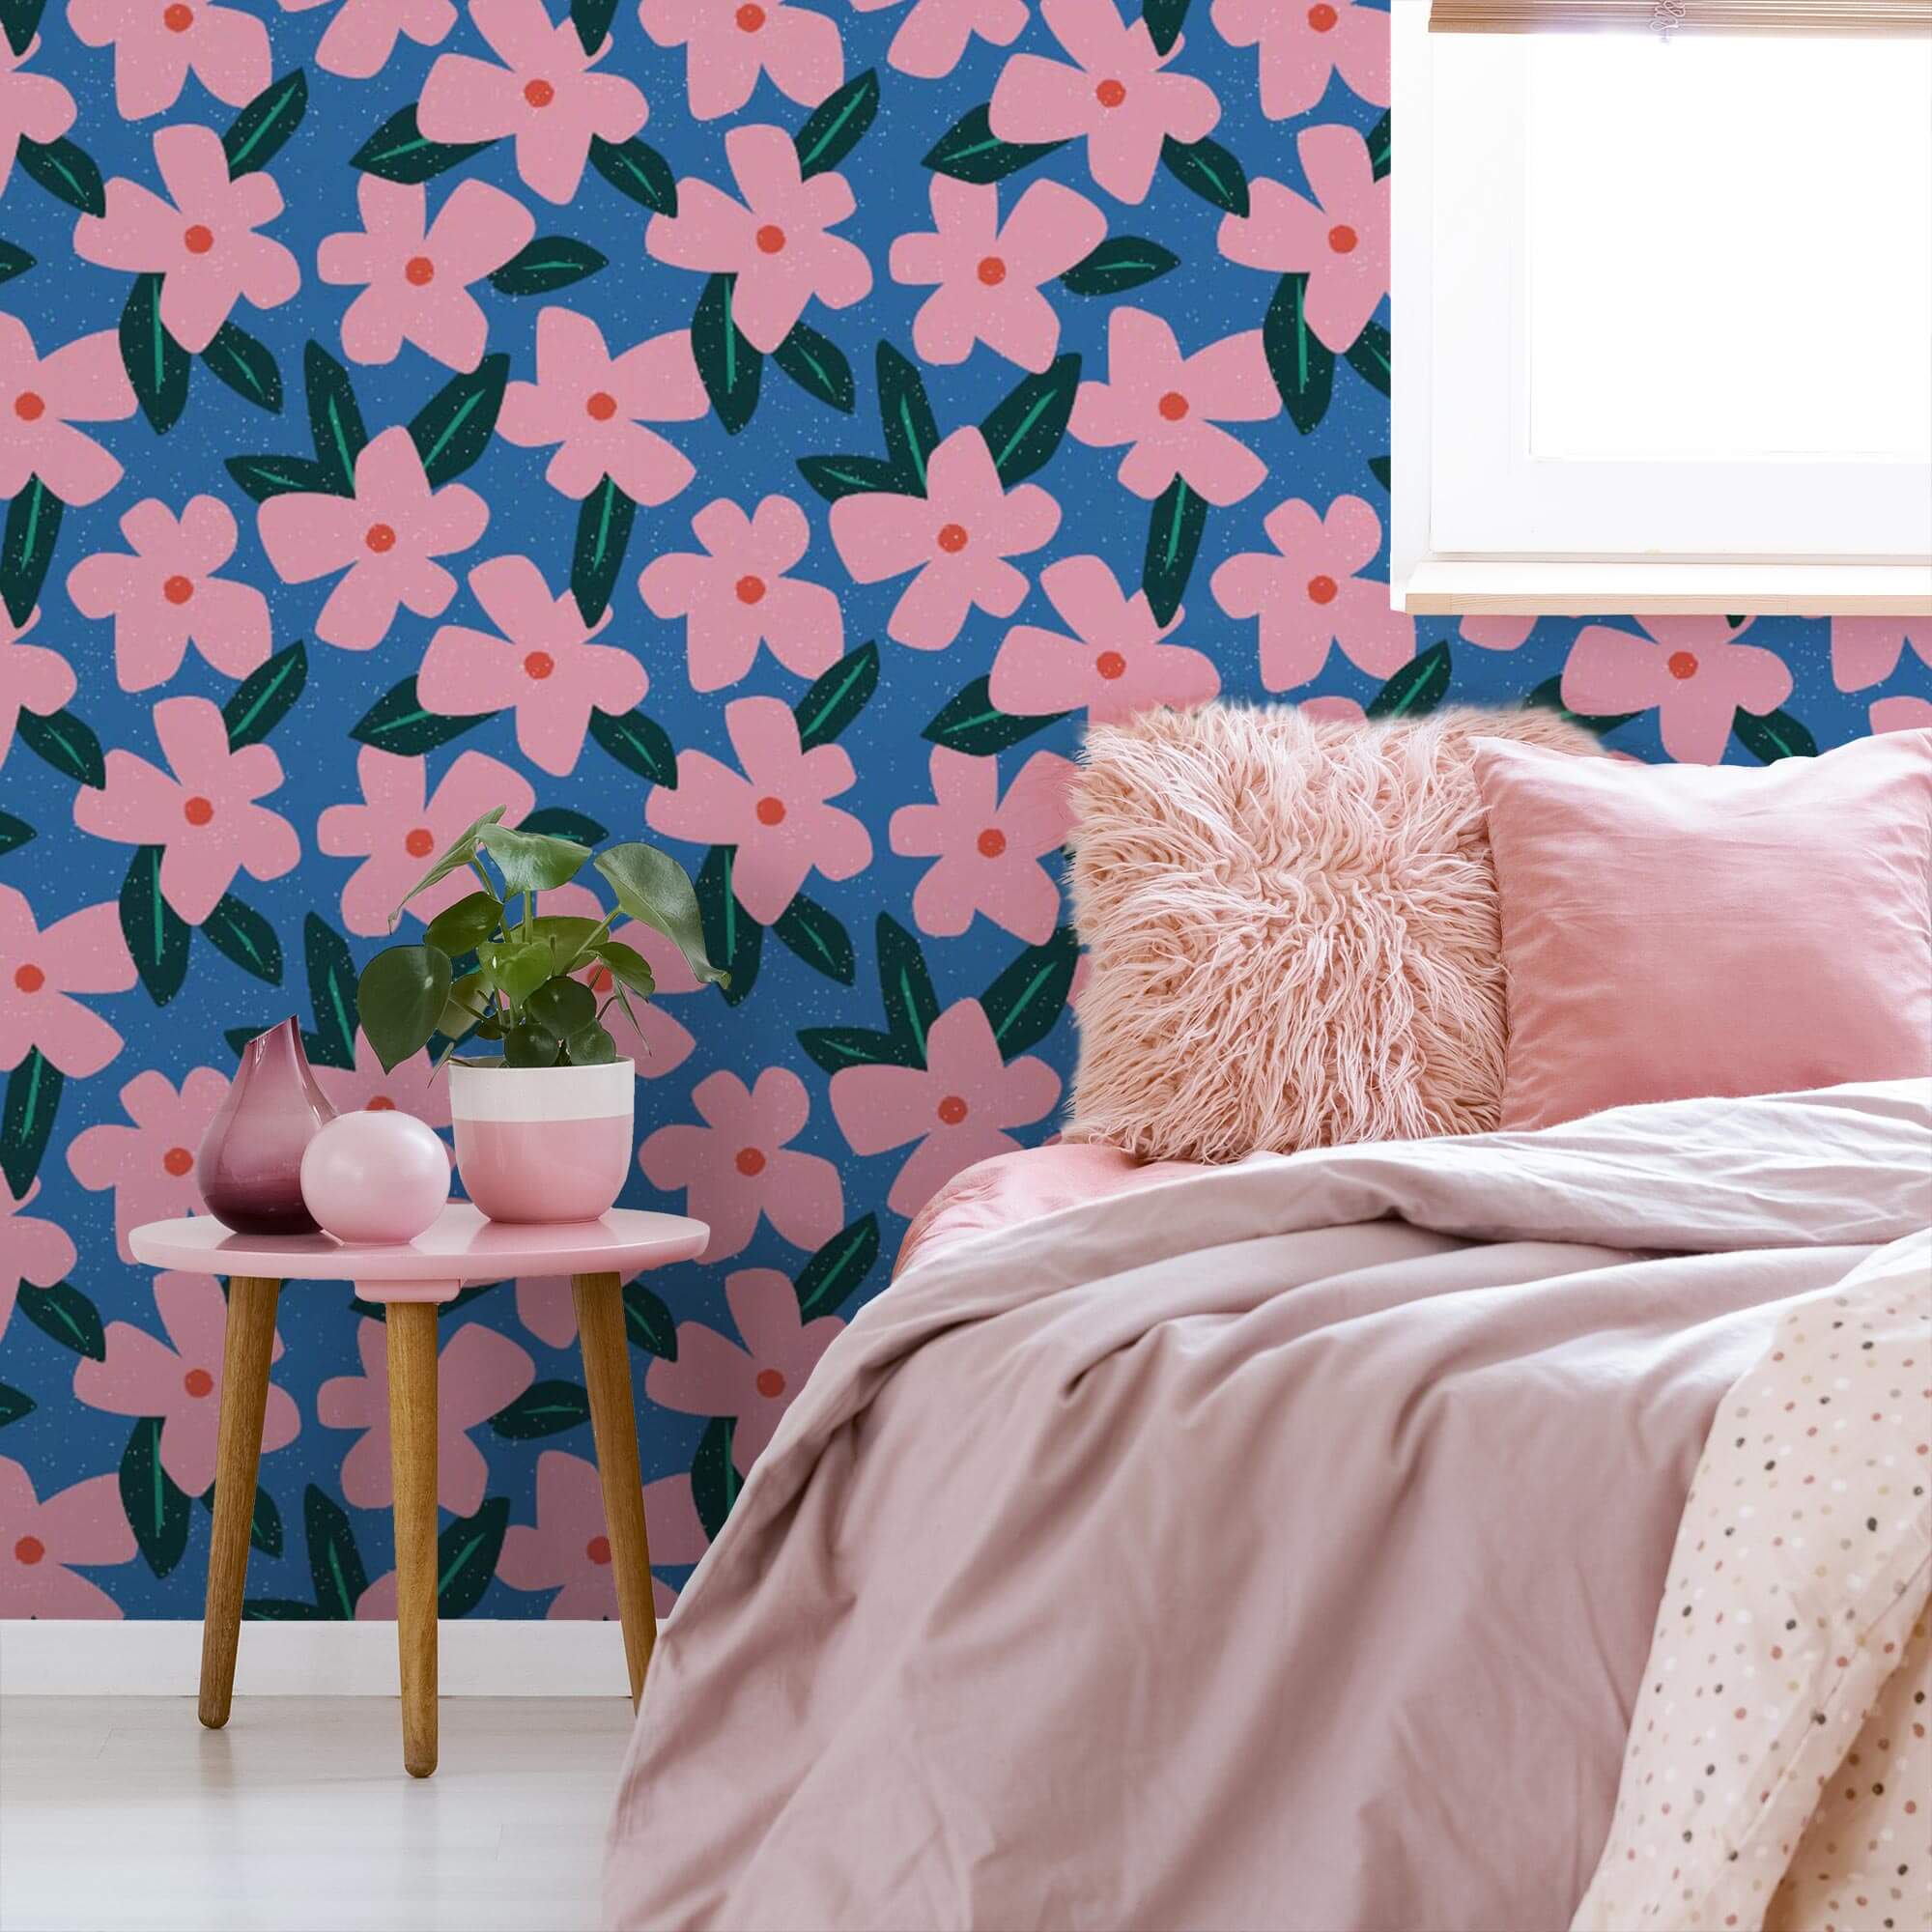 Blue and pink pattern on black background Bedroom Wallpaper  TenStickers